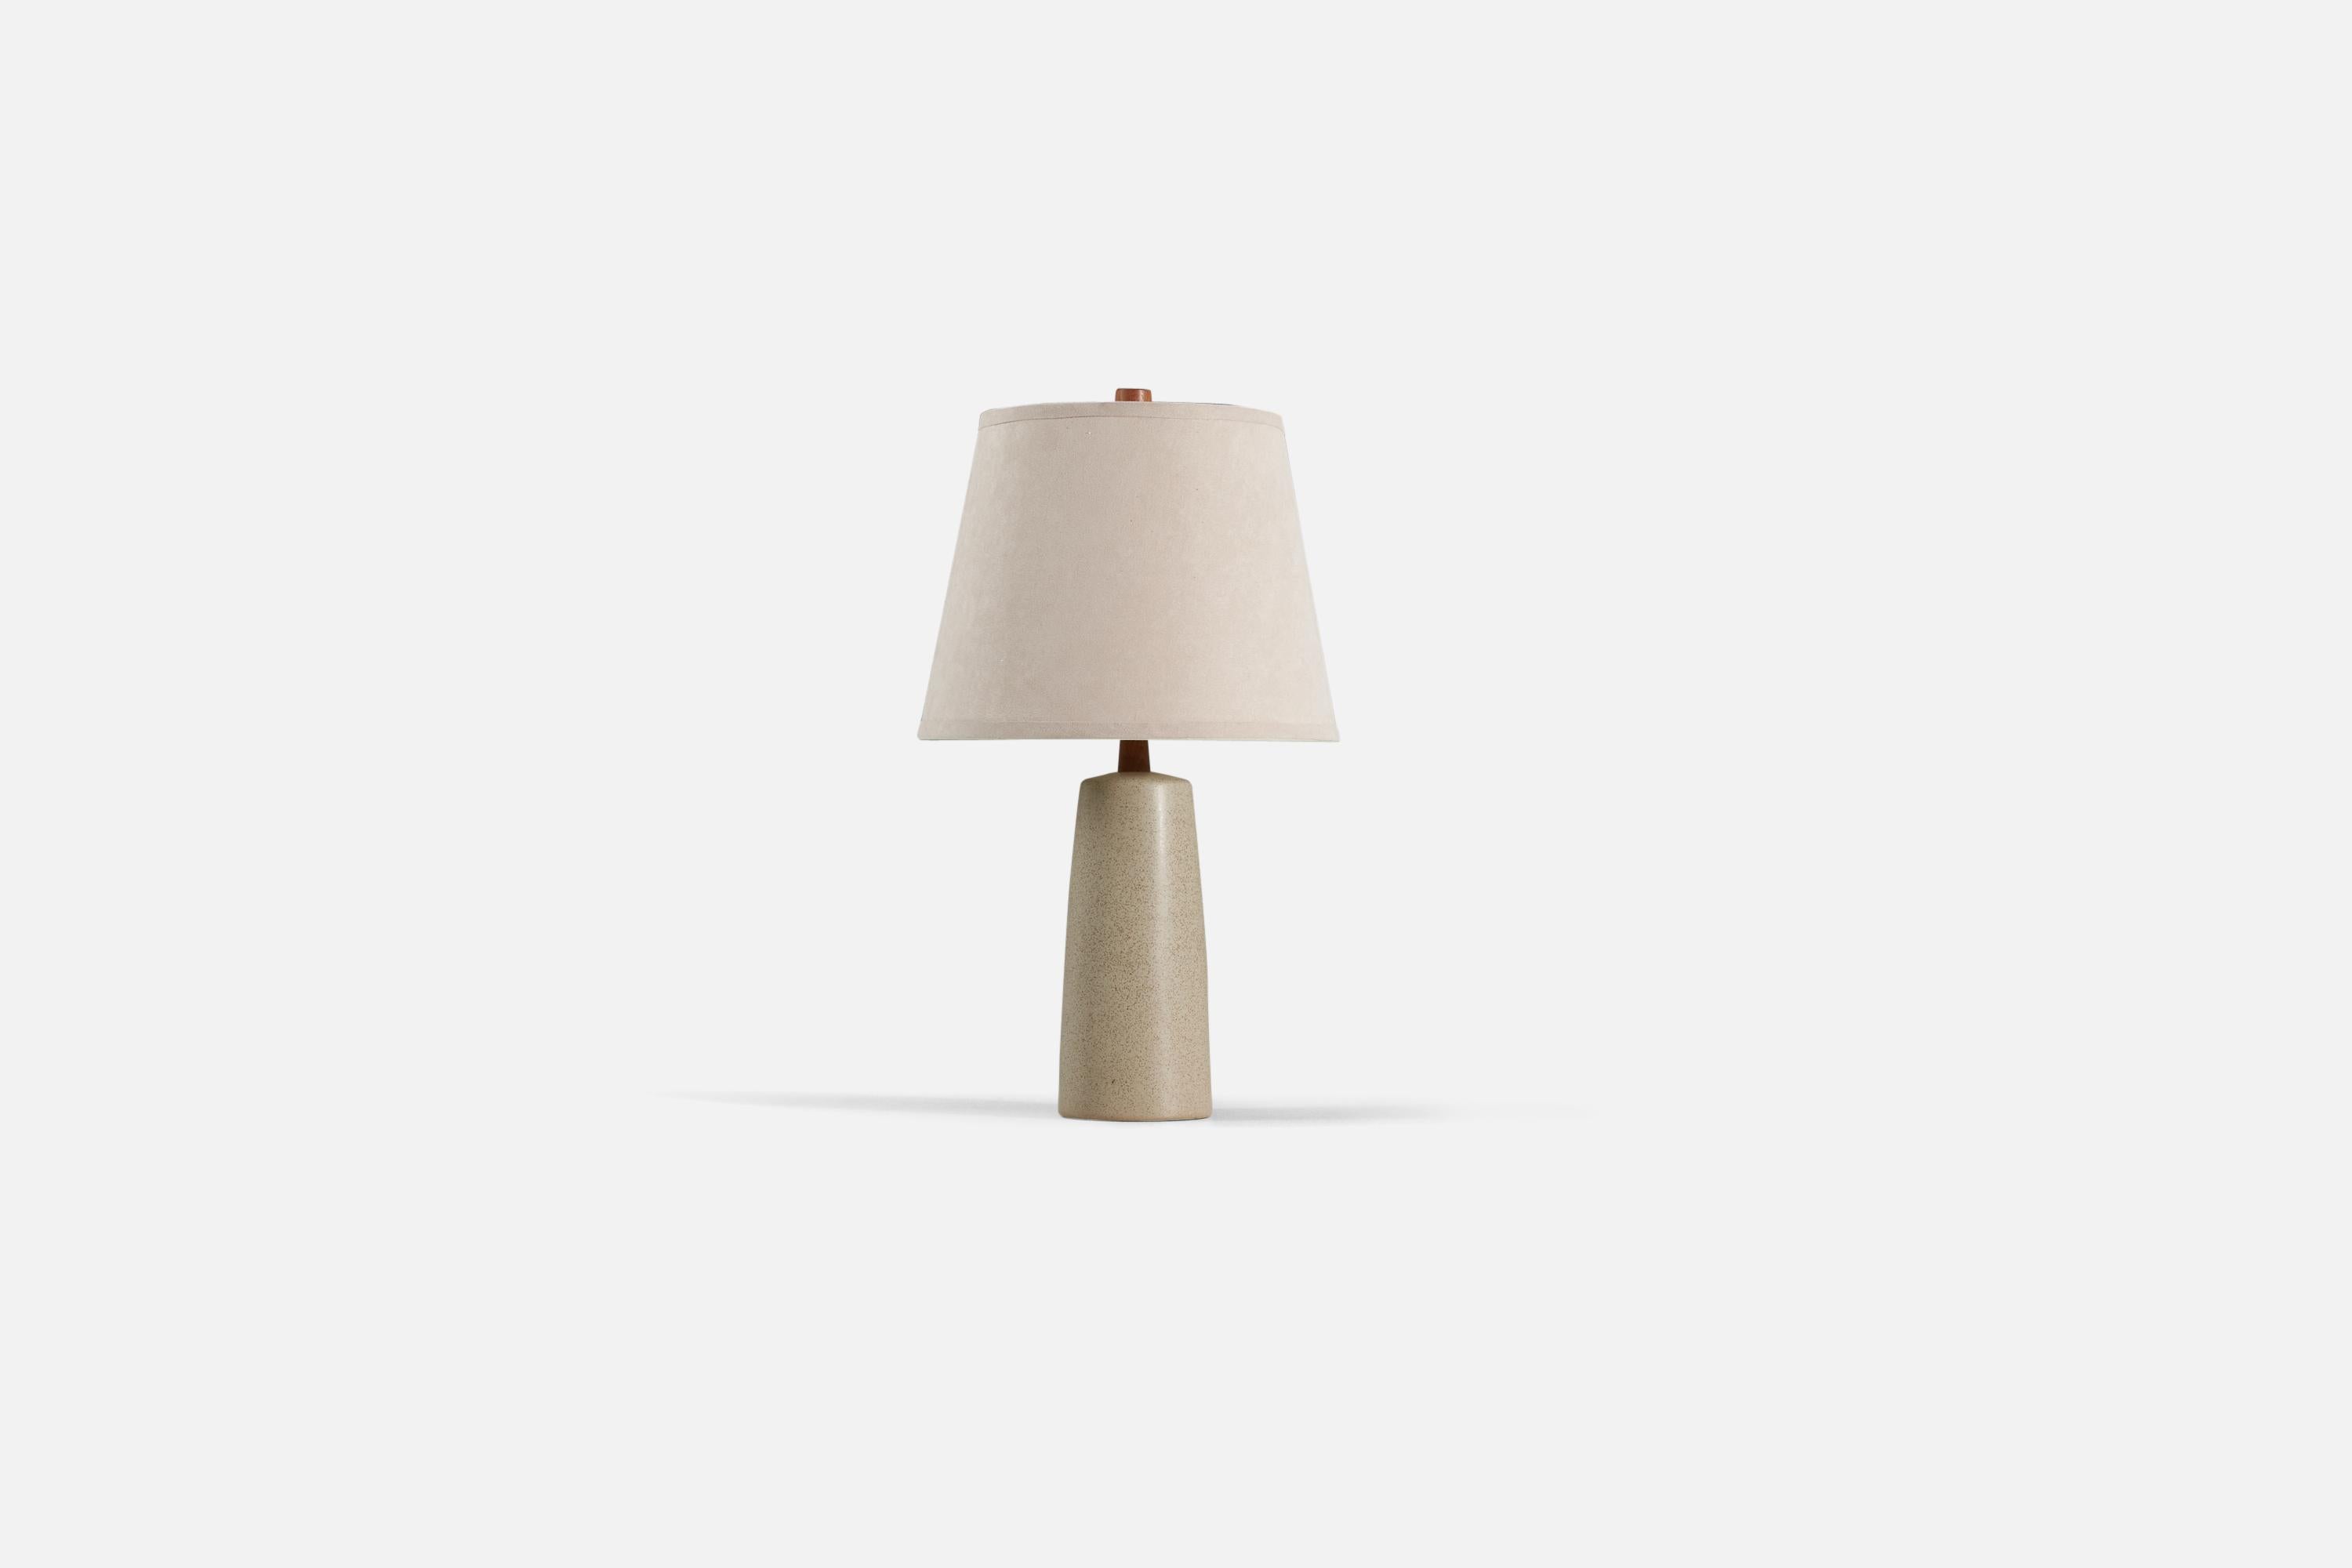 A tan table lamp with brown speckled glaze designed by husband and wife duo Jane & Gordon Martz. Produced by Marshall Studios, Indianapolis. 

The base is slip-cast and then dipped into glaze. The design also incorporates an exquisite walnut neck